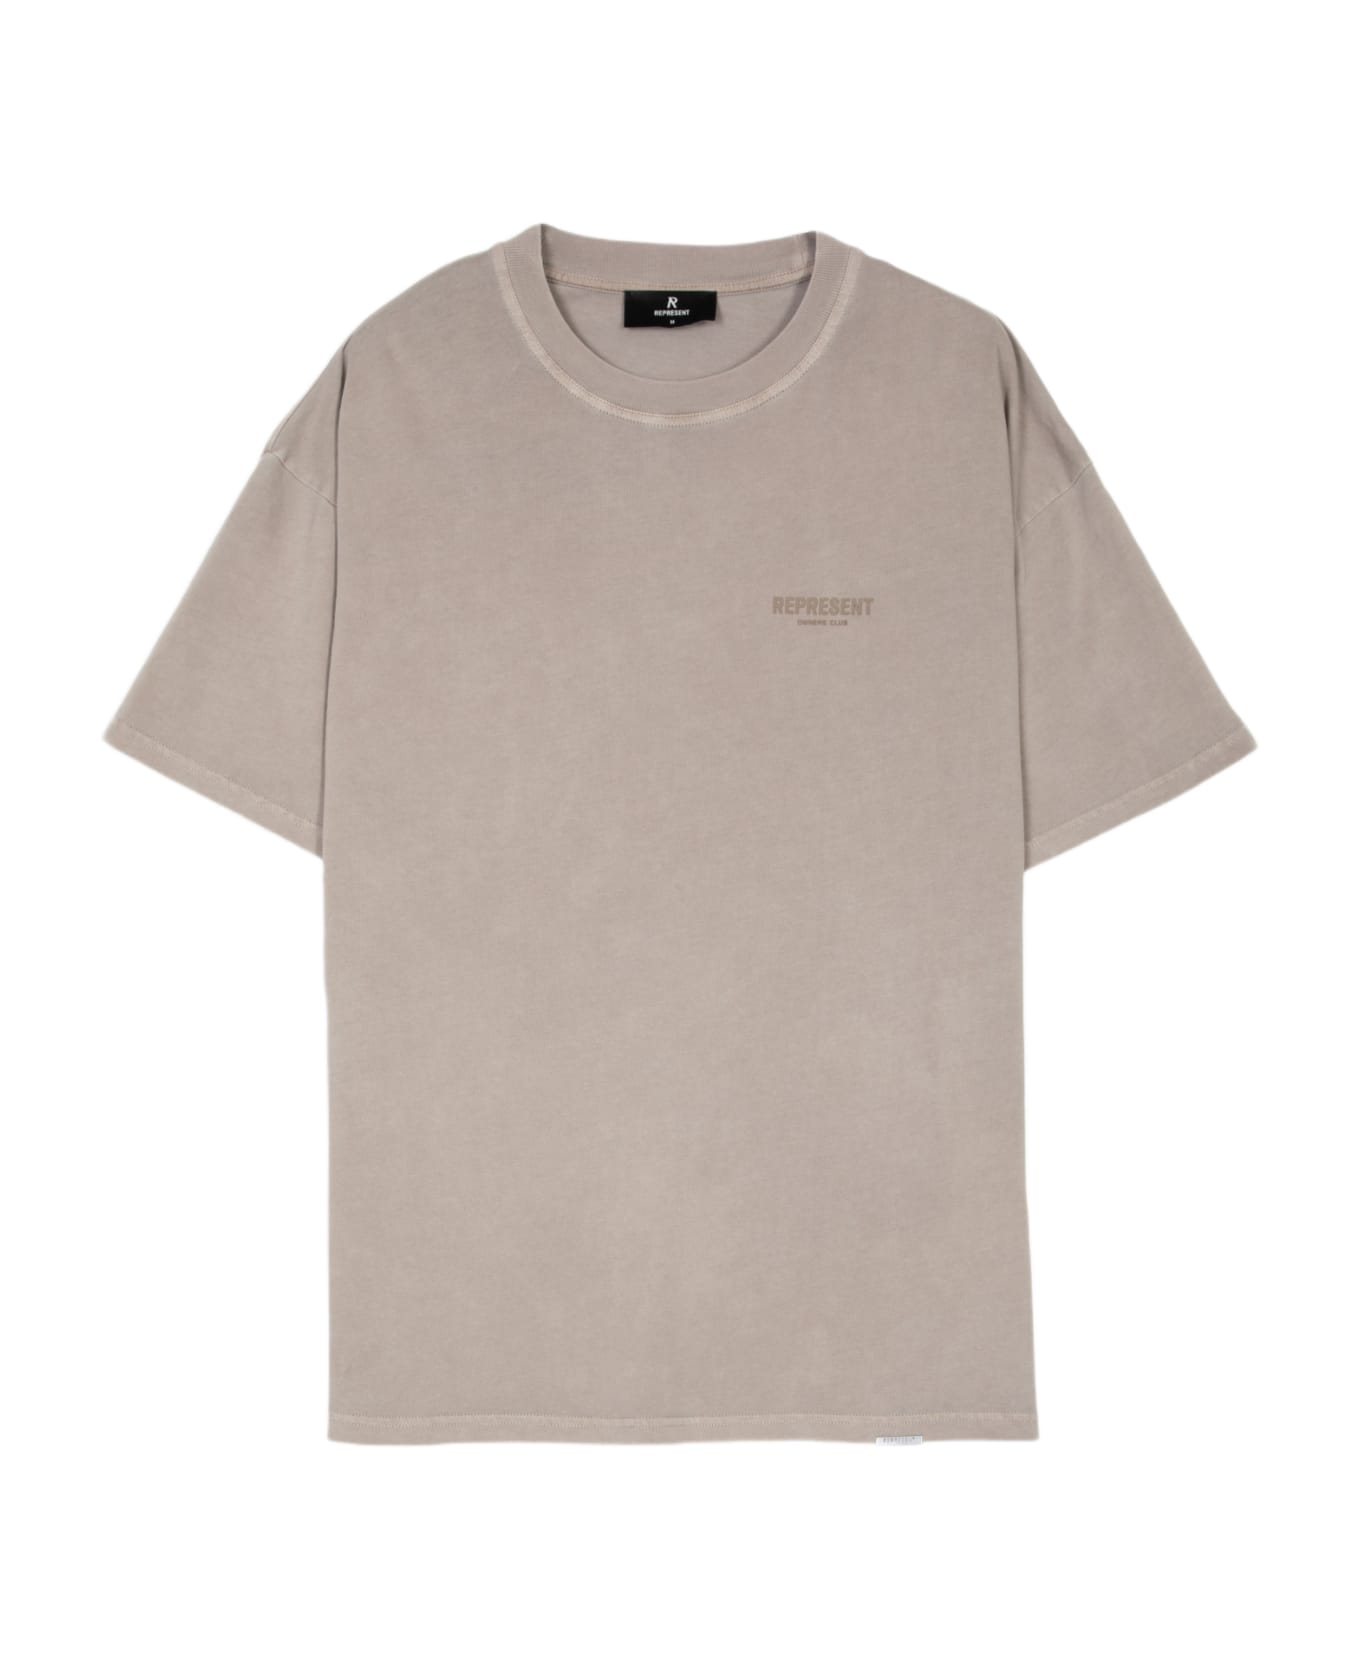 REPRESENT Owners Club T-shirt Faeded light browncotton t-shirt with logo - Owners Club T-shirt - Beige scuro